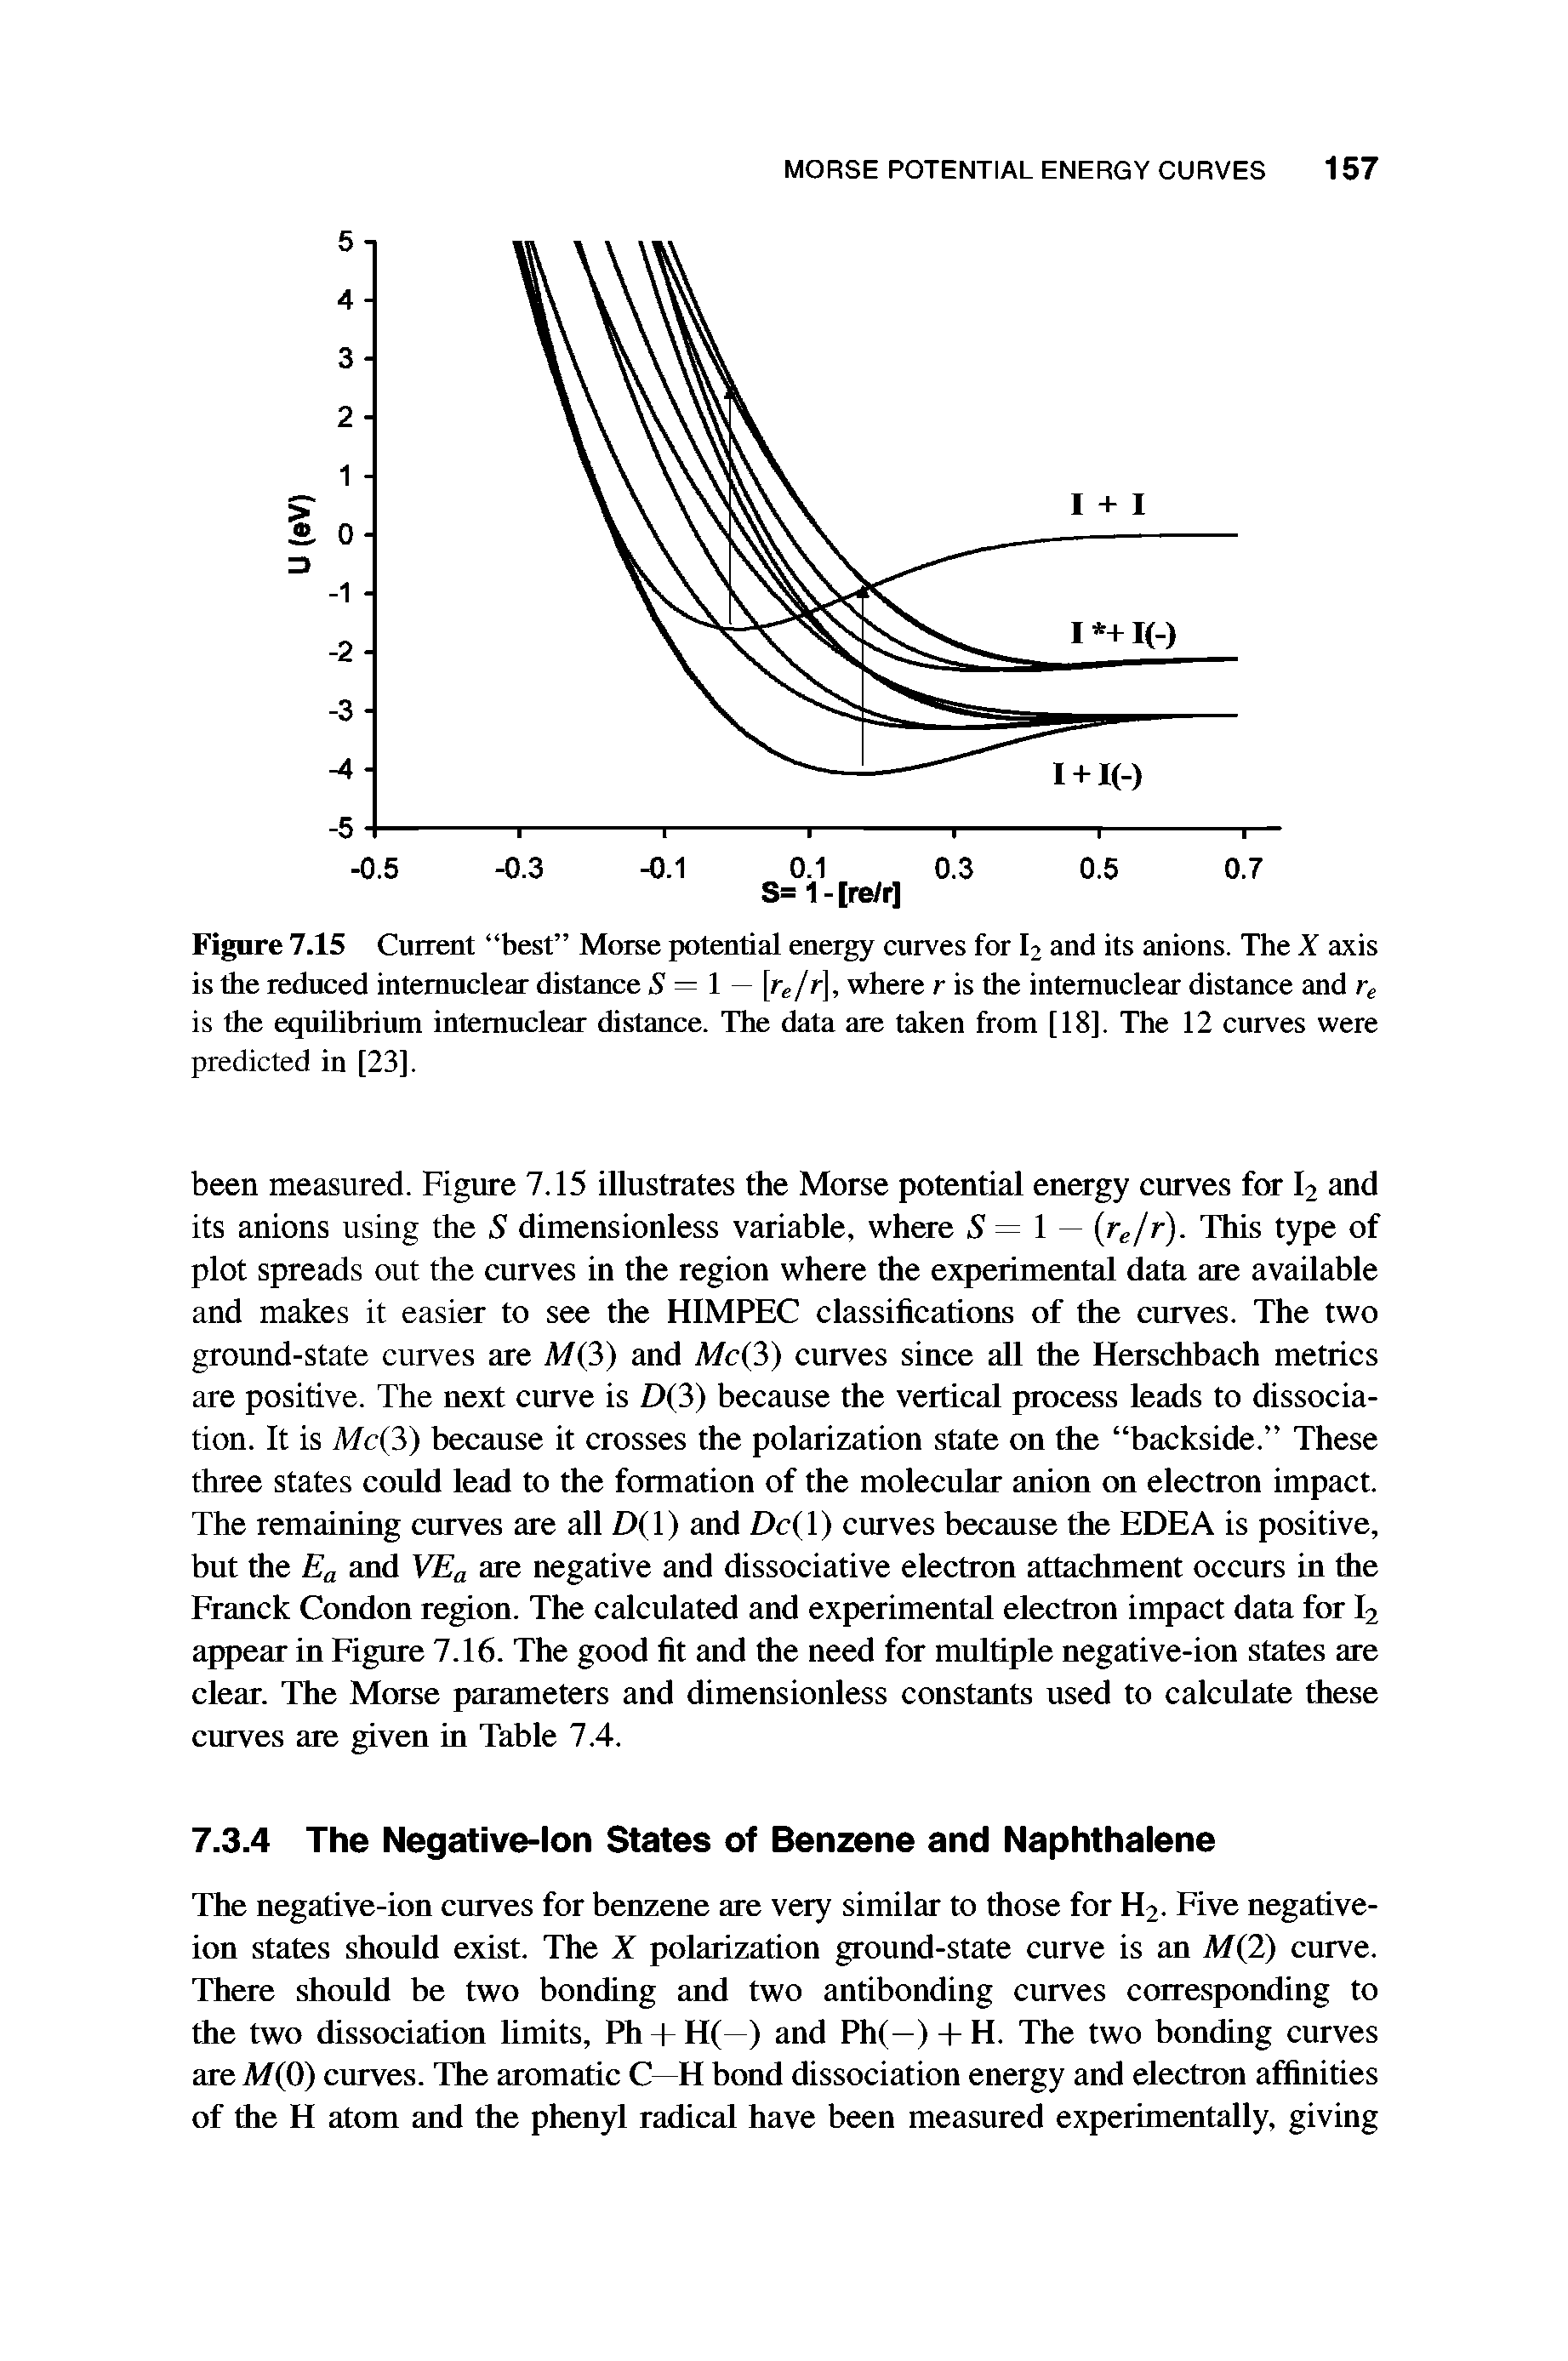 Figure 7.15 Current best Morse potential energy curves for I2 and its anions. The X axis is the reduced intemuclear distance 5=1 — reJ r, where r is the intemuclear distance and re is the equilibrium intemuclear distance. The data are taken from [18]. The 12 curves were predicted in [23].